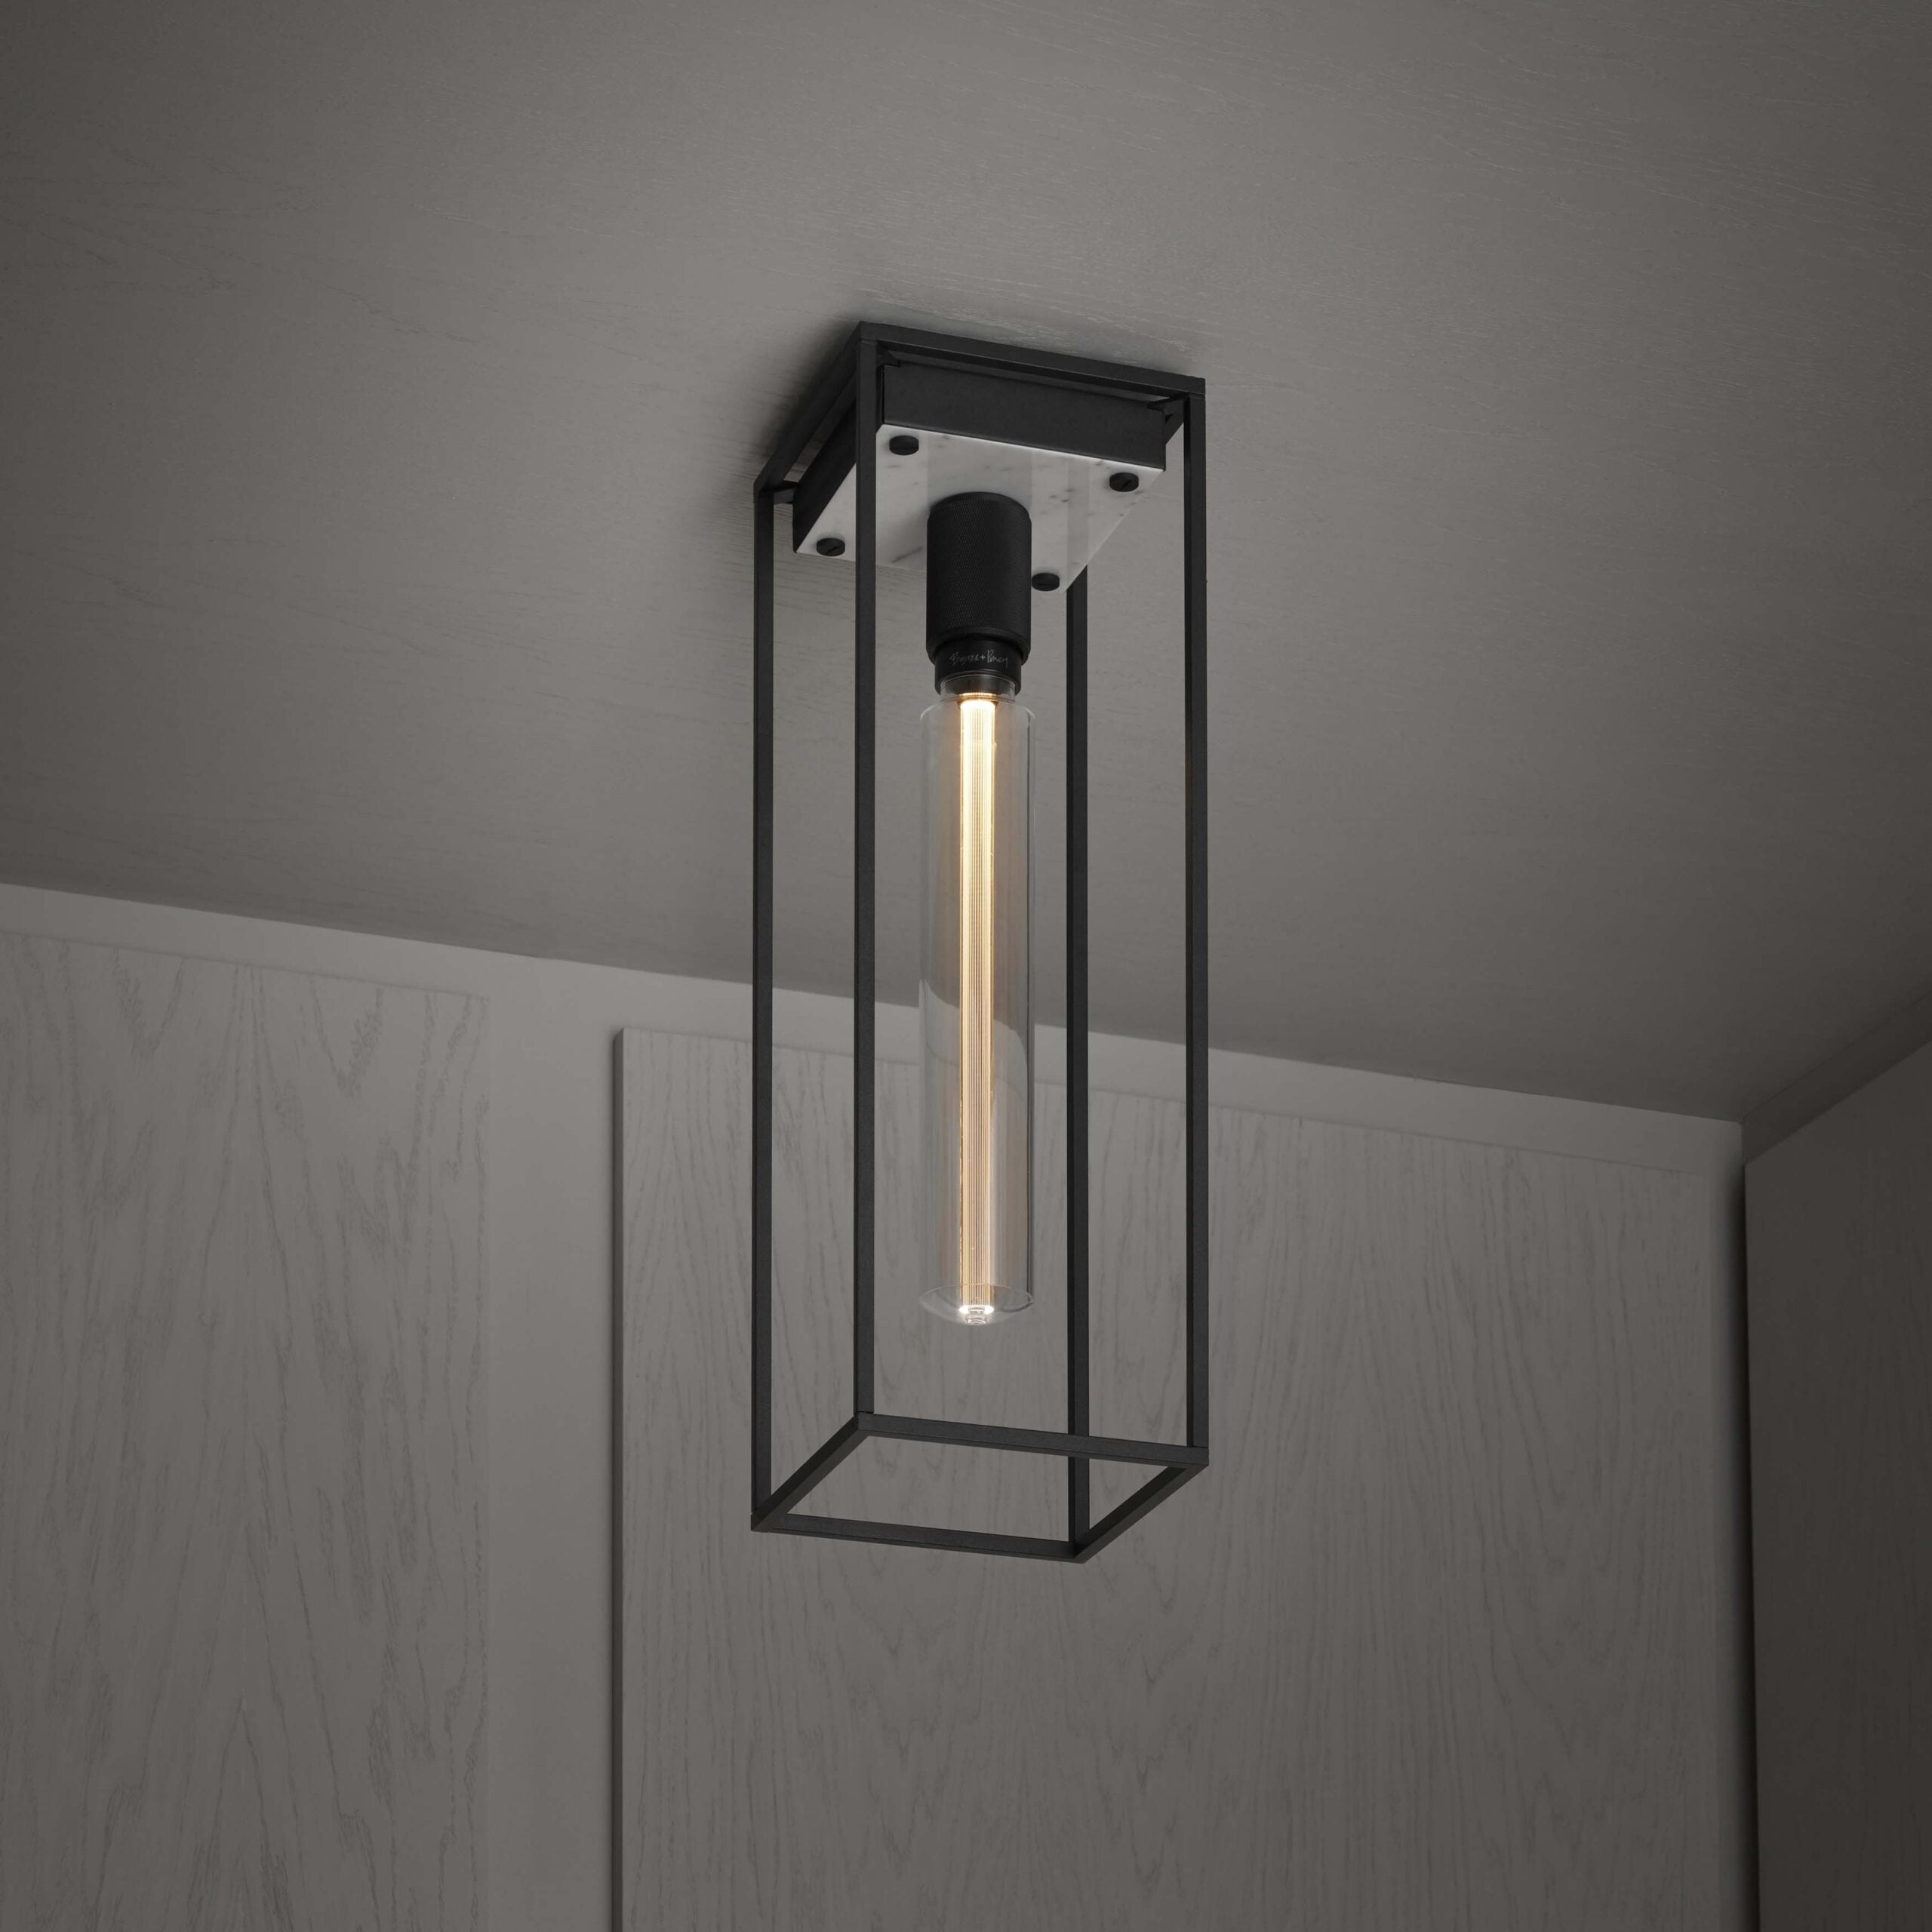 Buster + Punch - Caged Ceiling Light